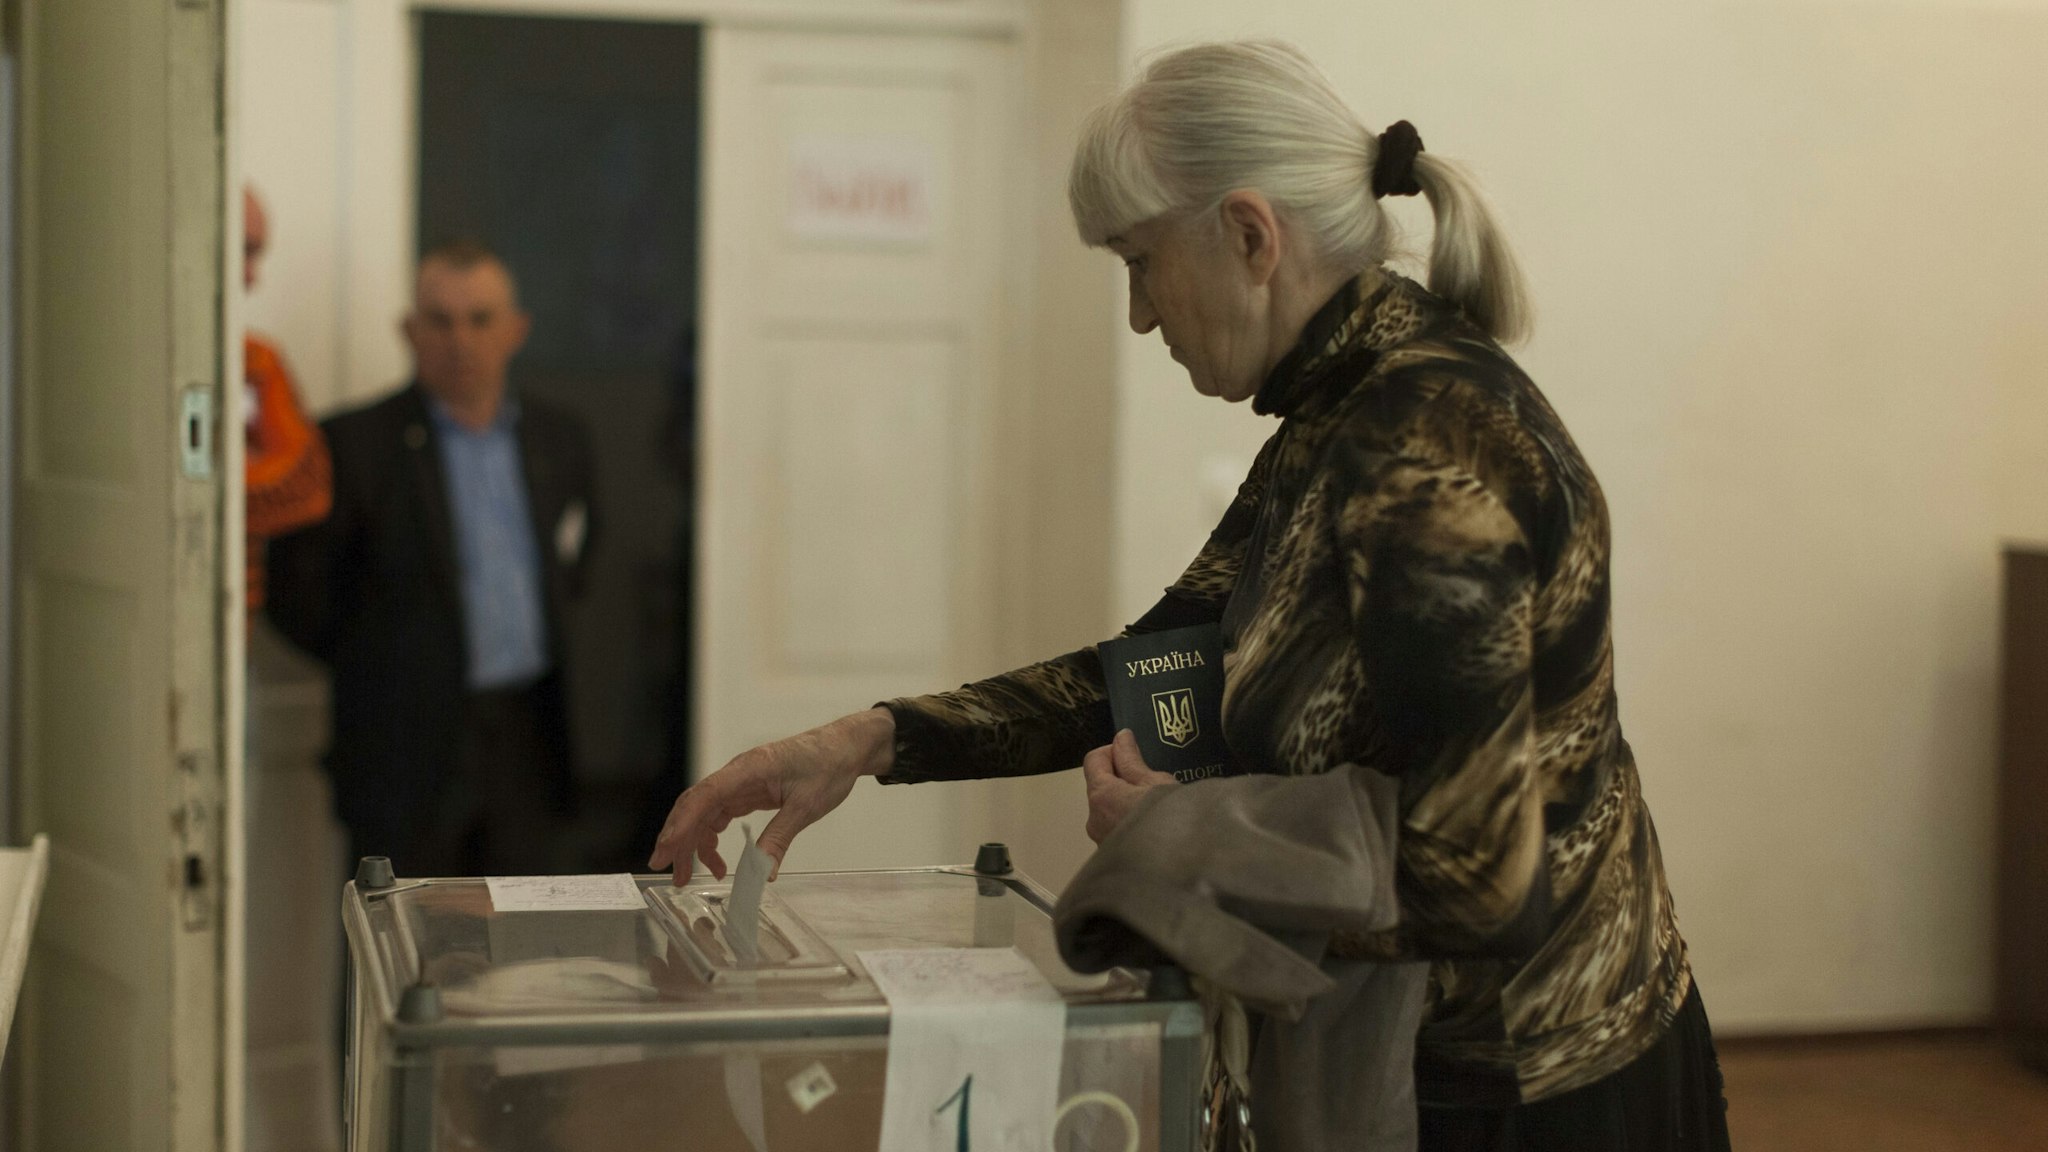 Citizens of Slavyansk vote in the referendum on independence from Ukraine organized by the People's Republic of Donetsk on May 11th, 2014.